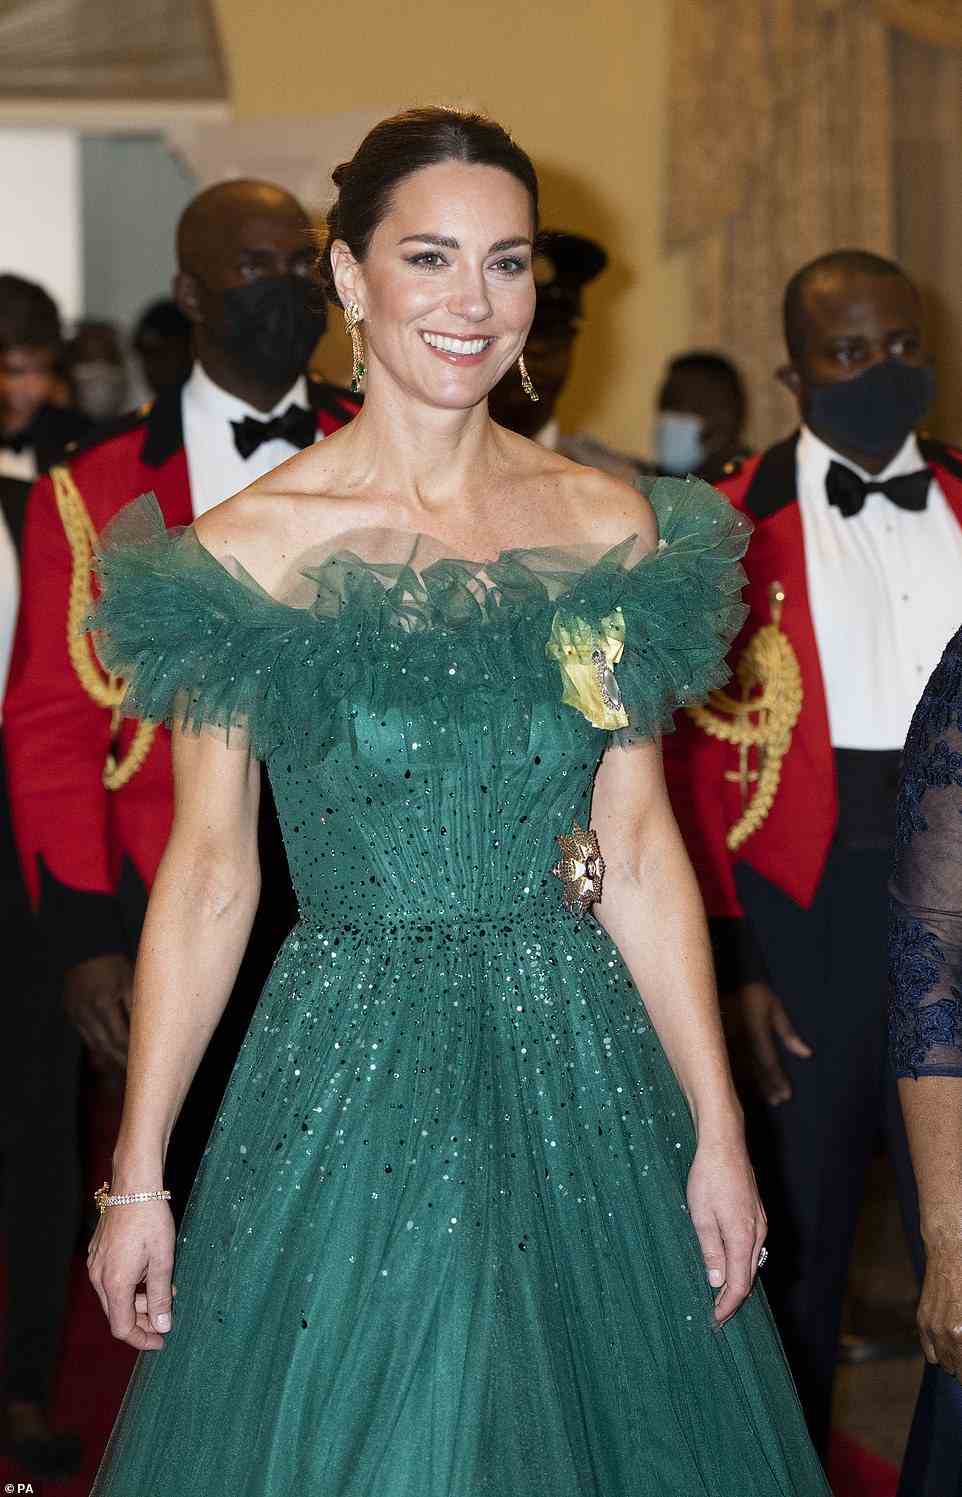 The other guests included Khadine Hylton who works in the field of the advancement of women and girls through quality education and is a recipient of the Governor-General's Achievement Award for her outstanding achievements. Pictured: The Duchess of Cambridge